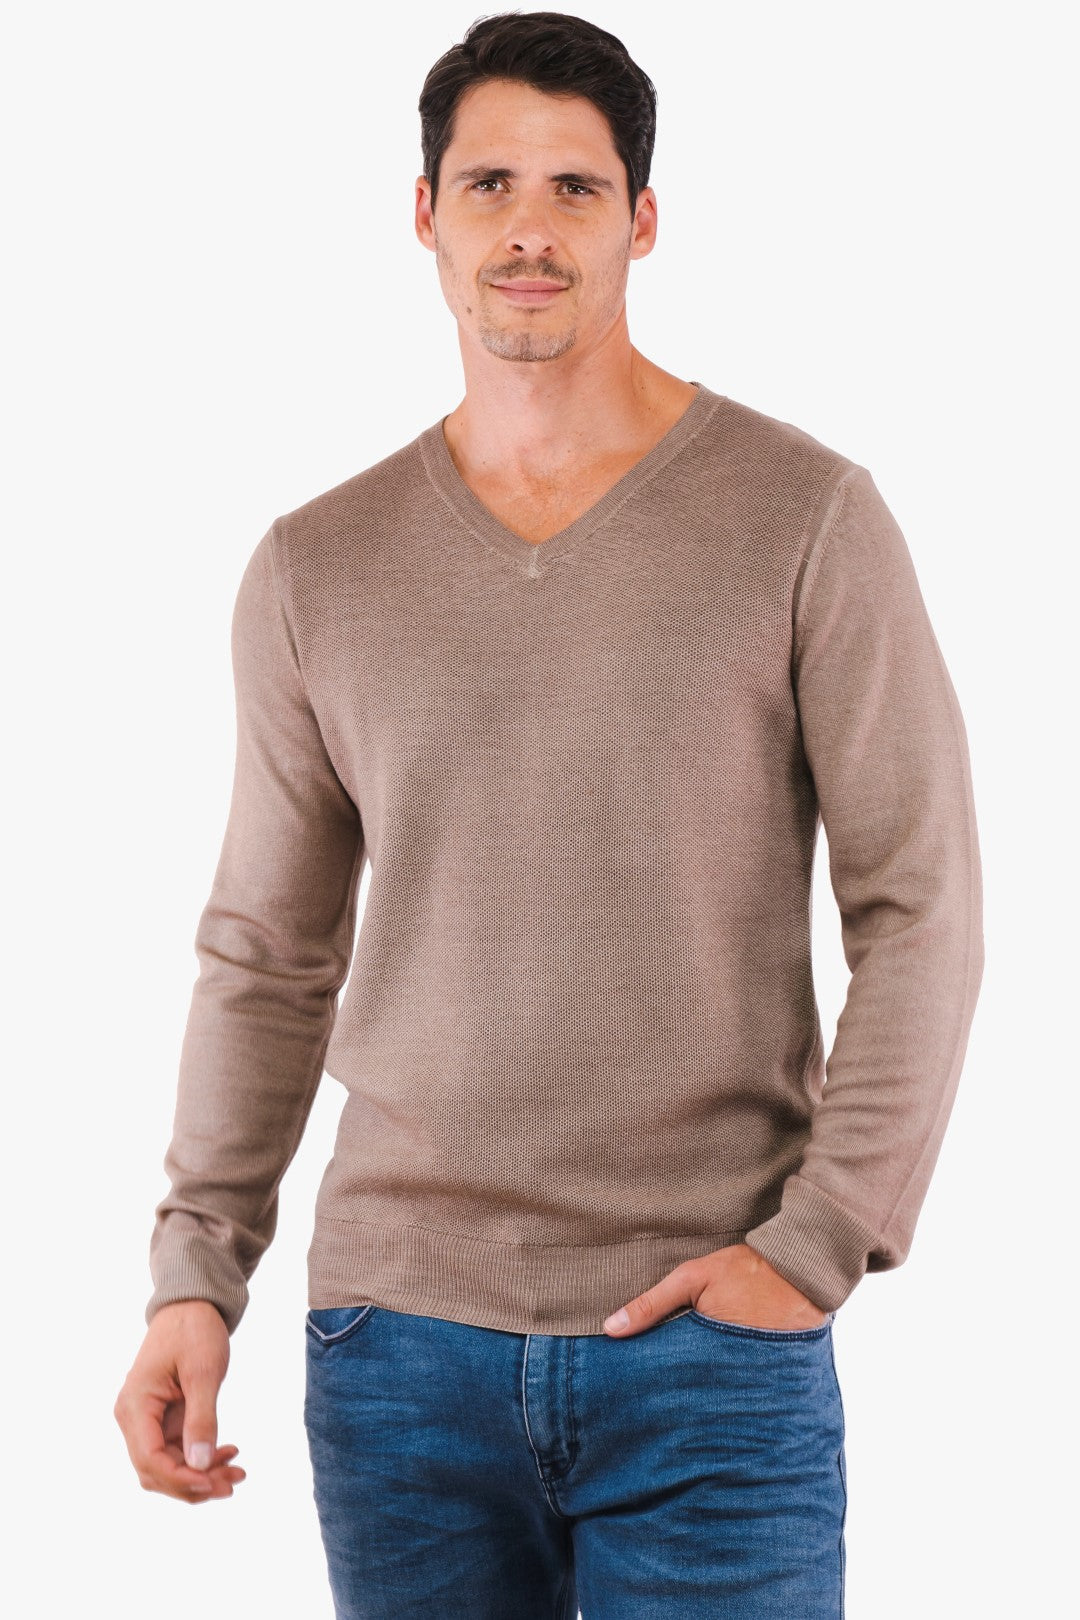 Hörst sweater in Mocha color